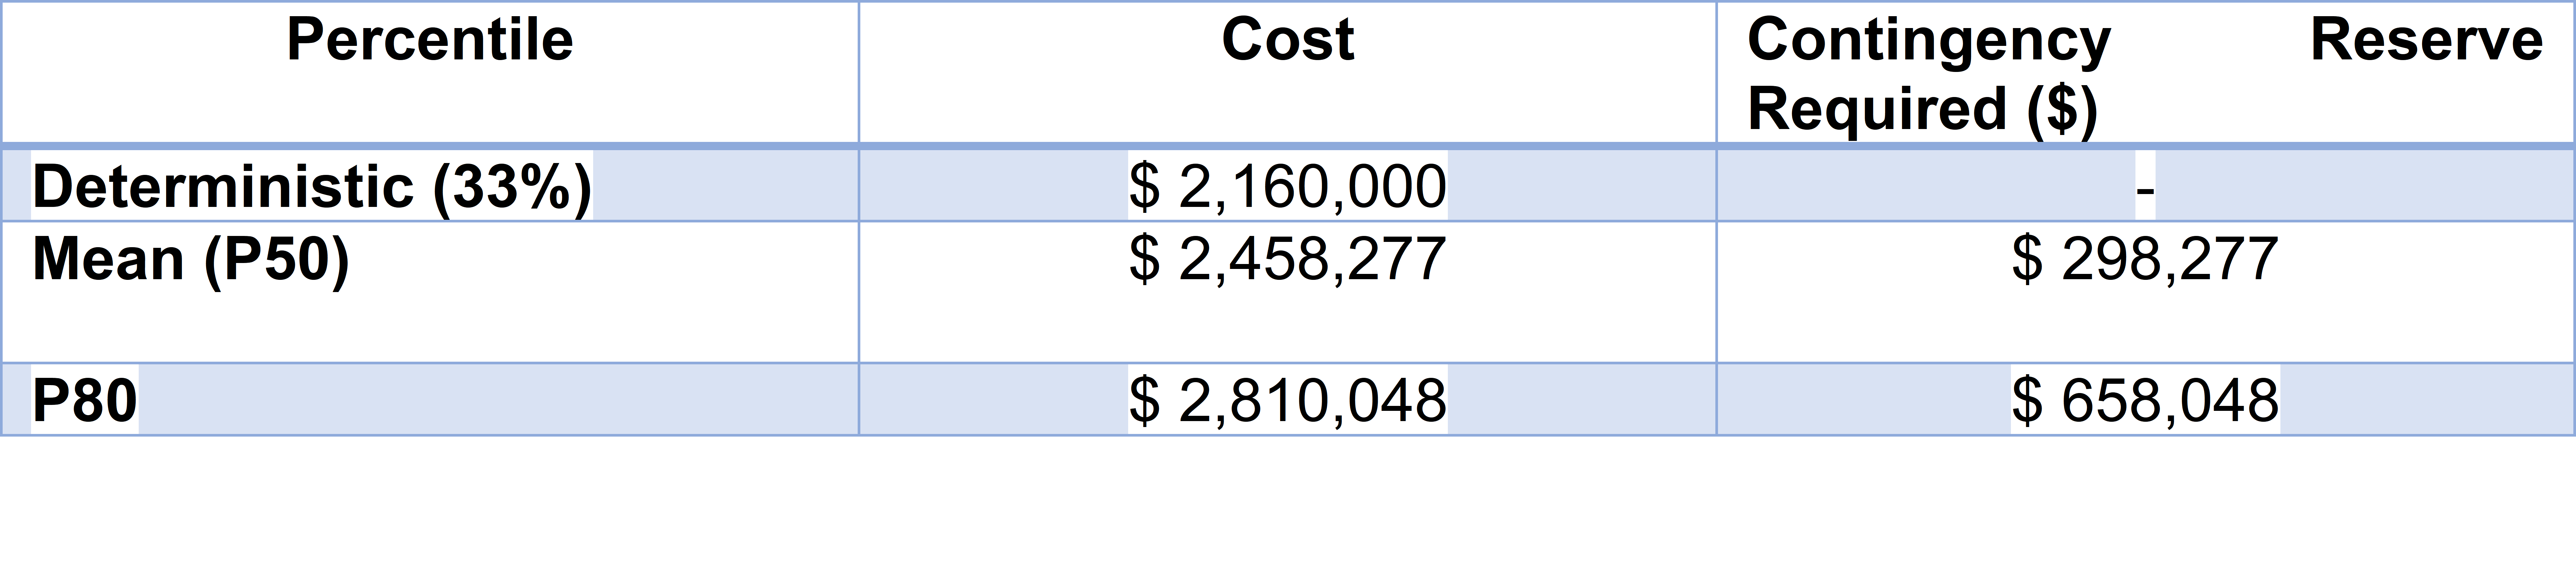 Cost Contingency Reserve